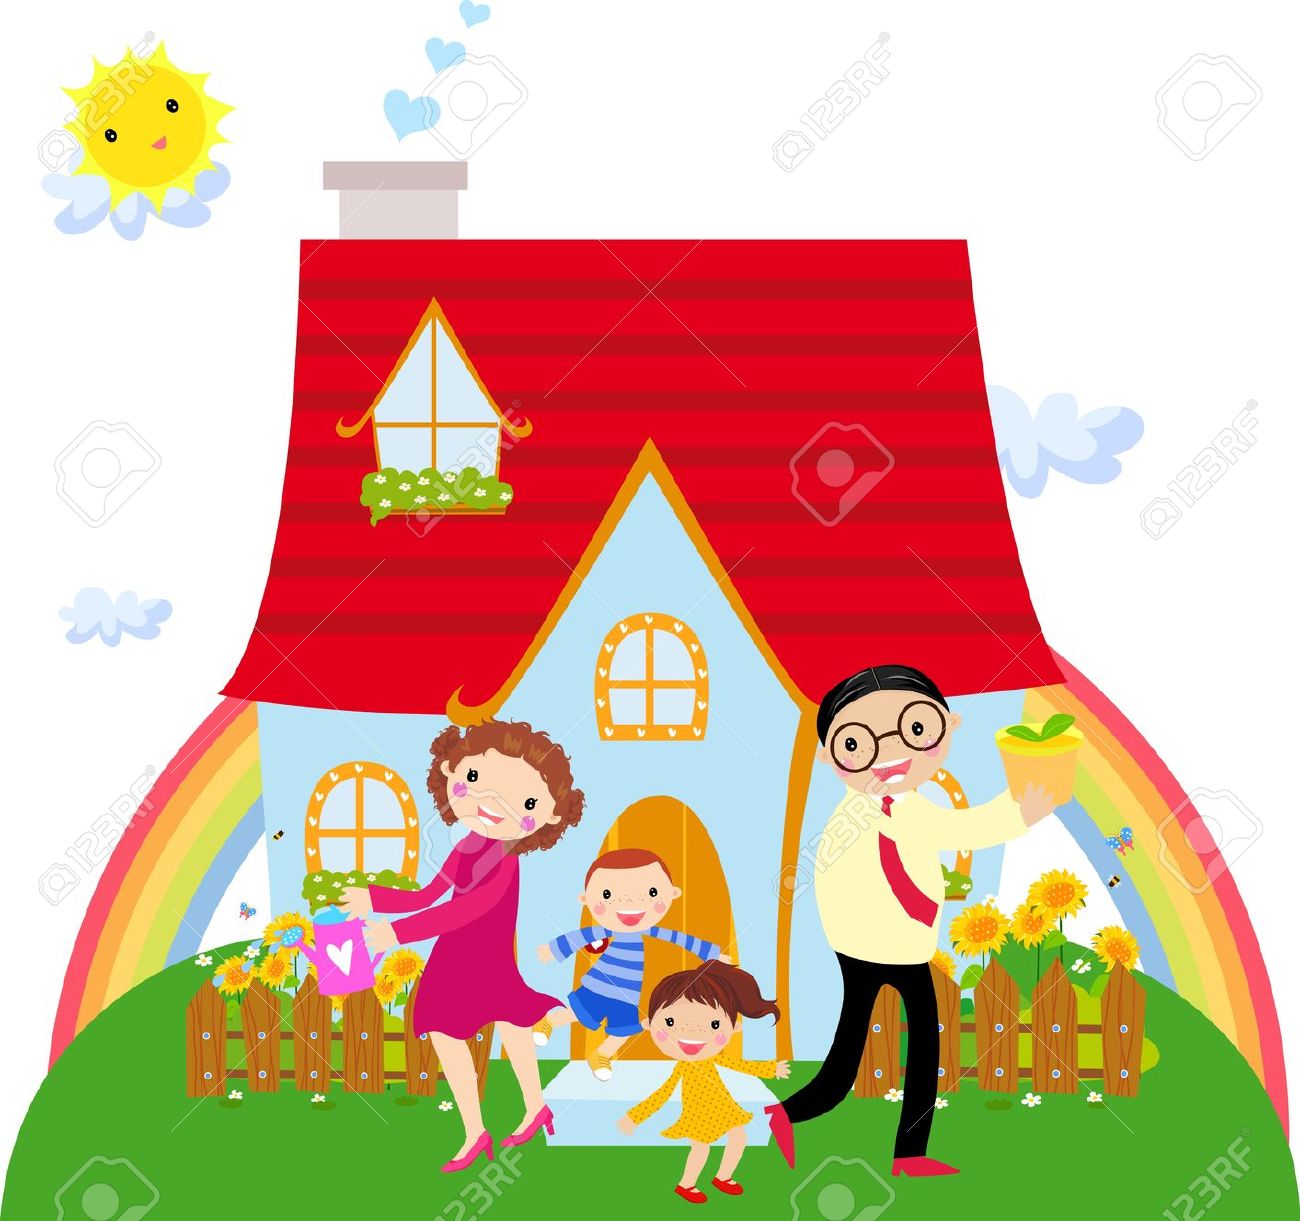 Happy family home clipart